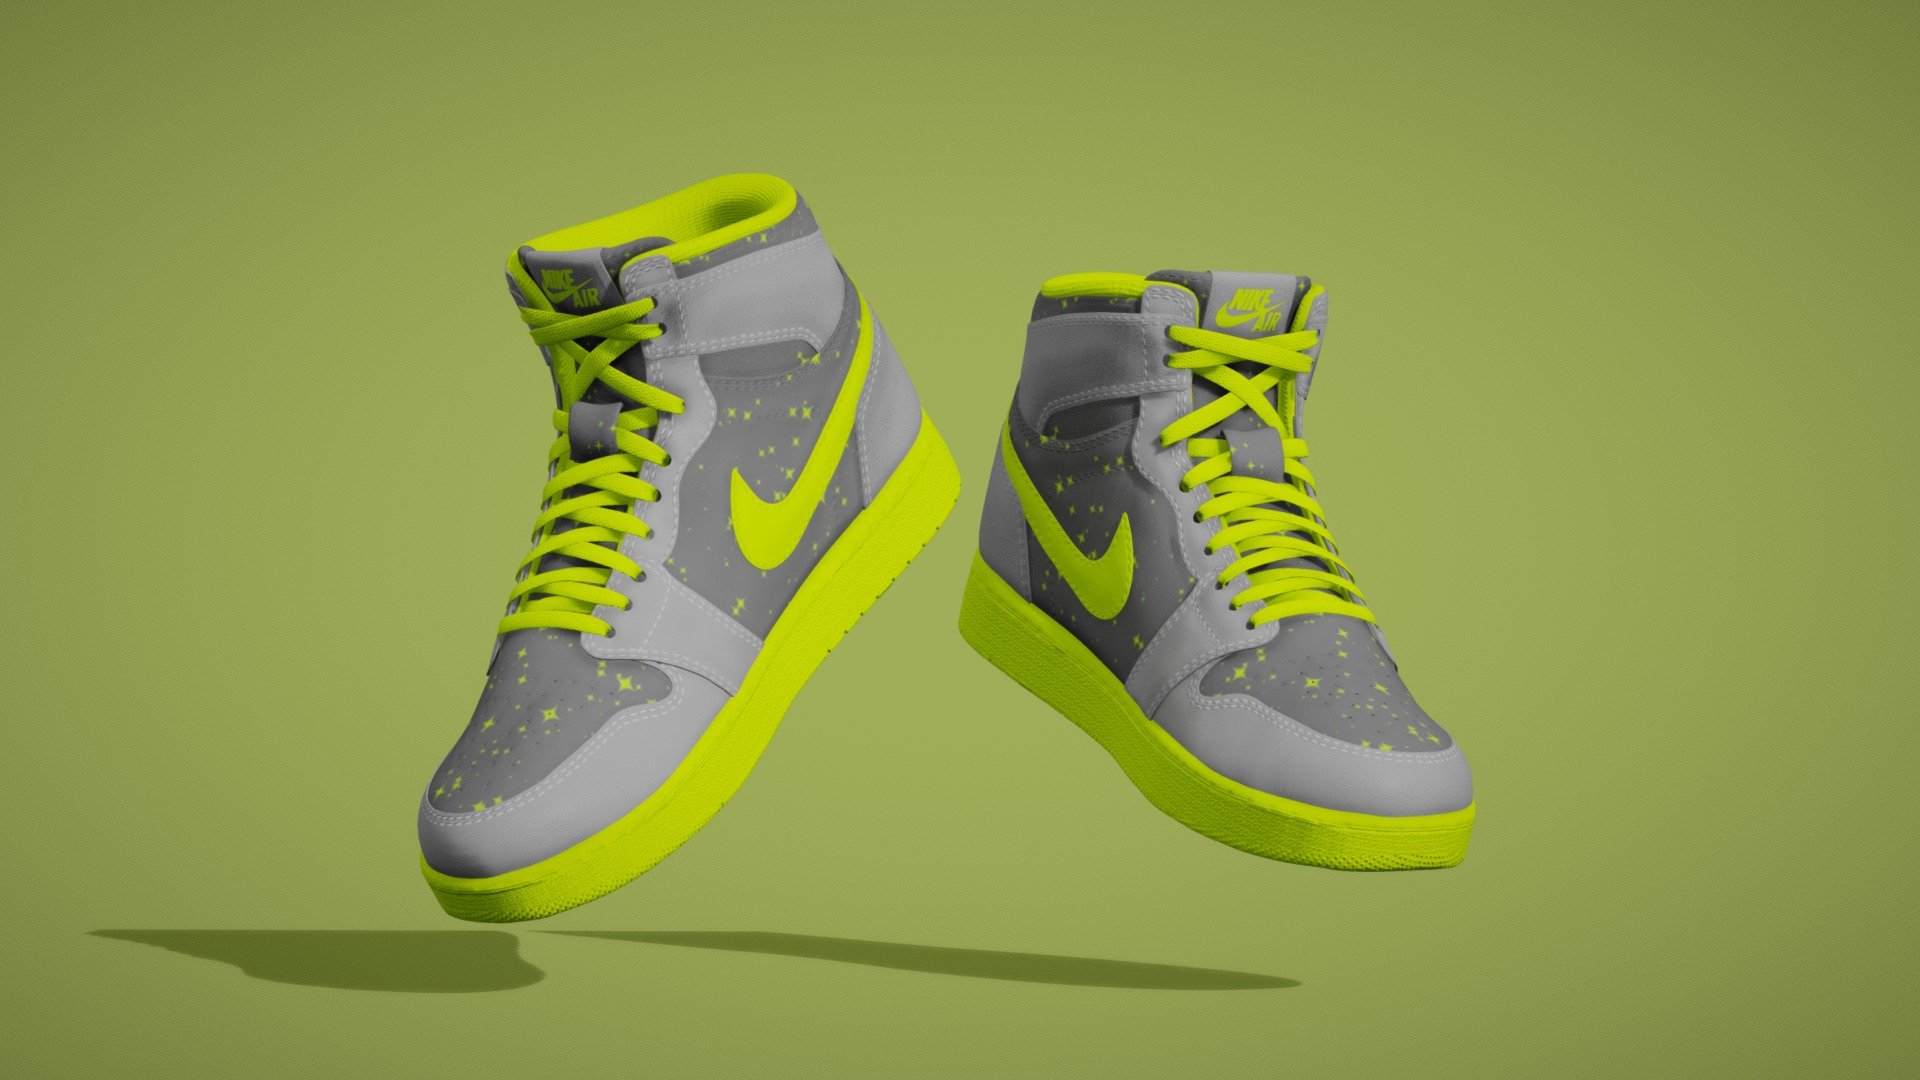 It is a High Quality Air Jordan NIKE Shoes 3d model

Modeling : Modeled with fine Details, Will be perfect for any Cool 3d character Project, Or can be traits of NFT Character

Texture : Textured in High quality 4k texture ( 2 Material - 1 left shoe/2 Right Shoe )

Variants : There are 10 different textures set and this is 9 of 10 Variants.

Feel free to comment for review of this model or any suggestions 3d model